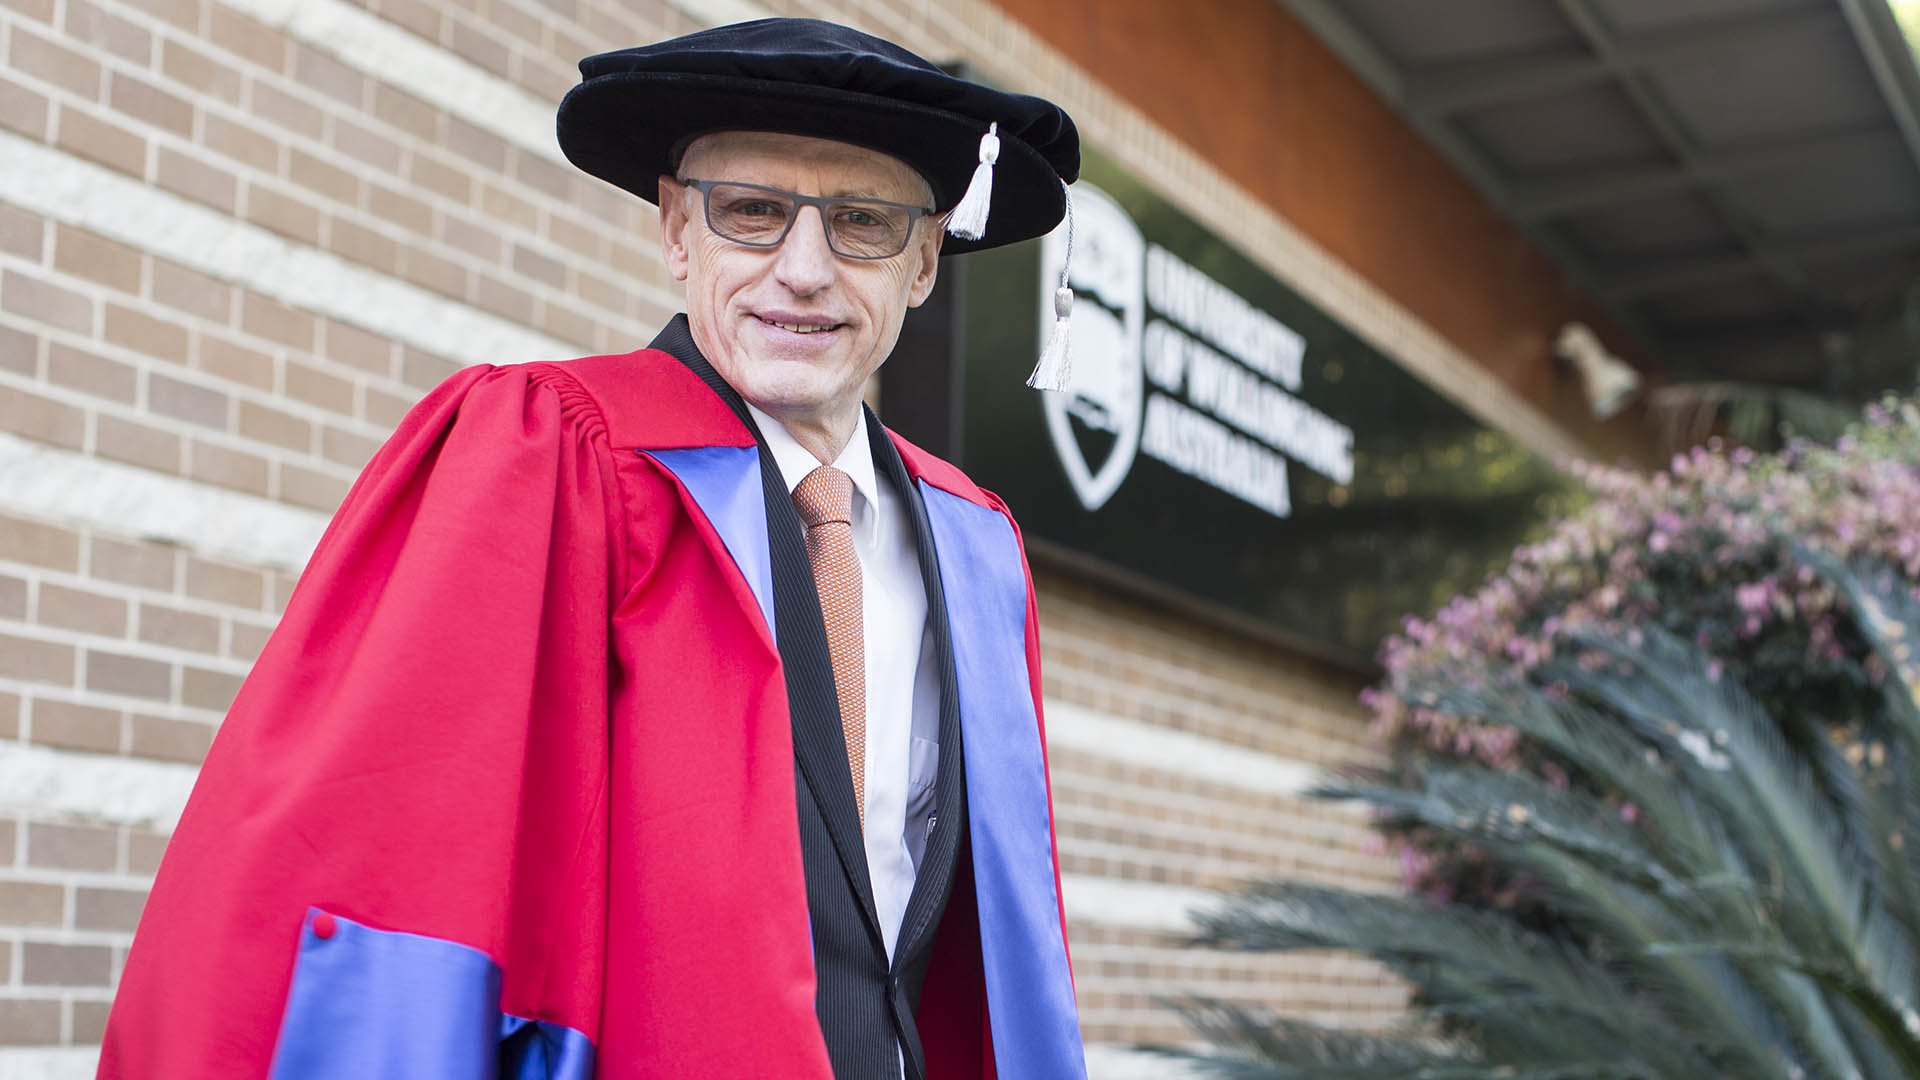 David Gruen was awarded an Honorary Doctor of Science by UOW in 2017.